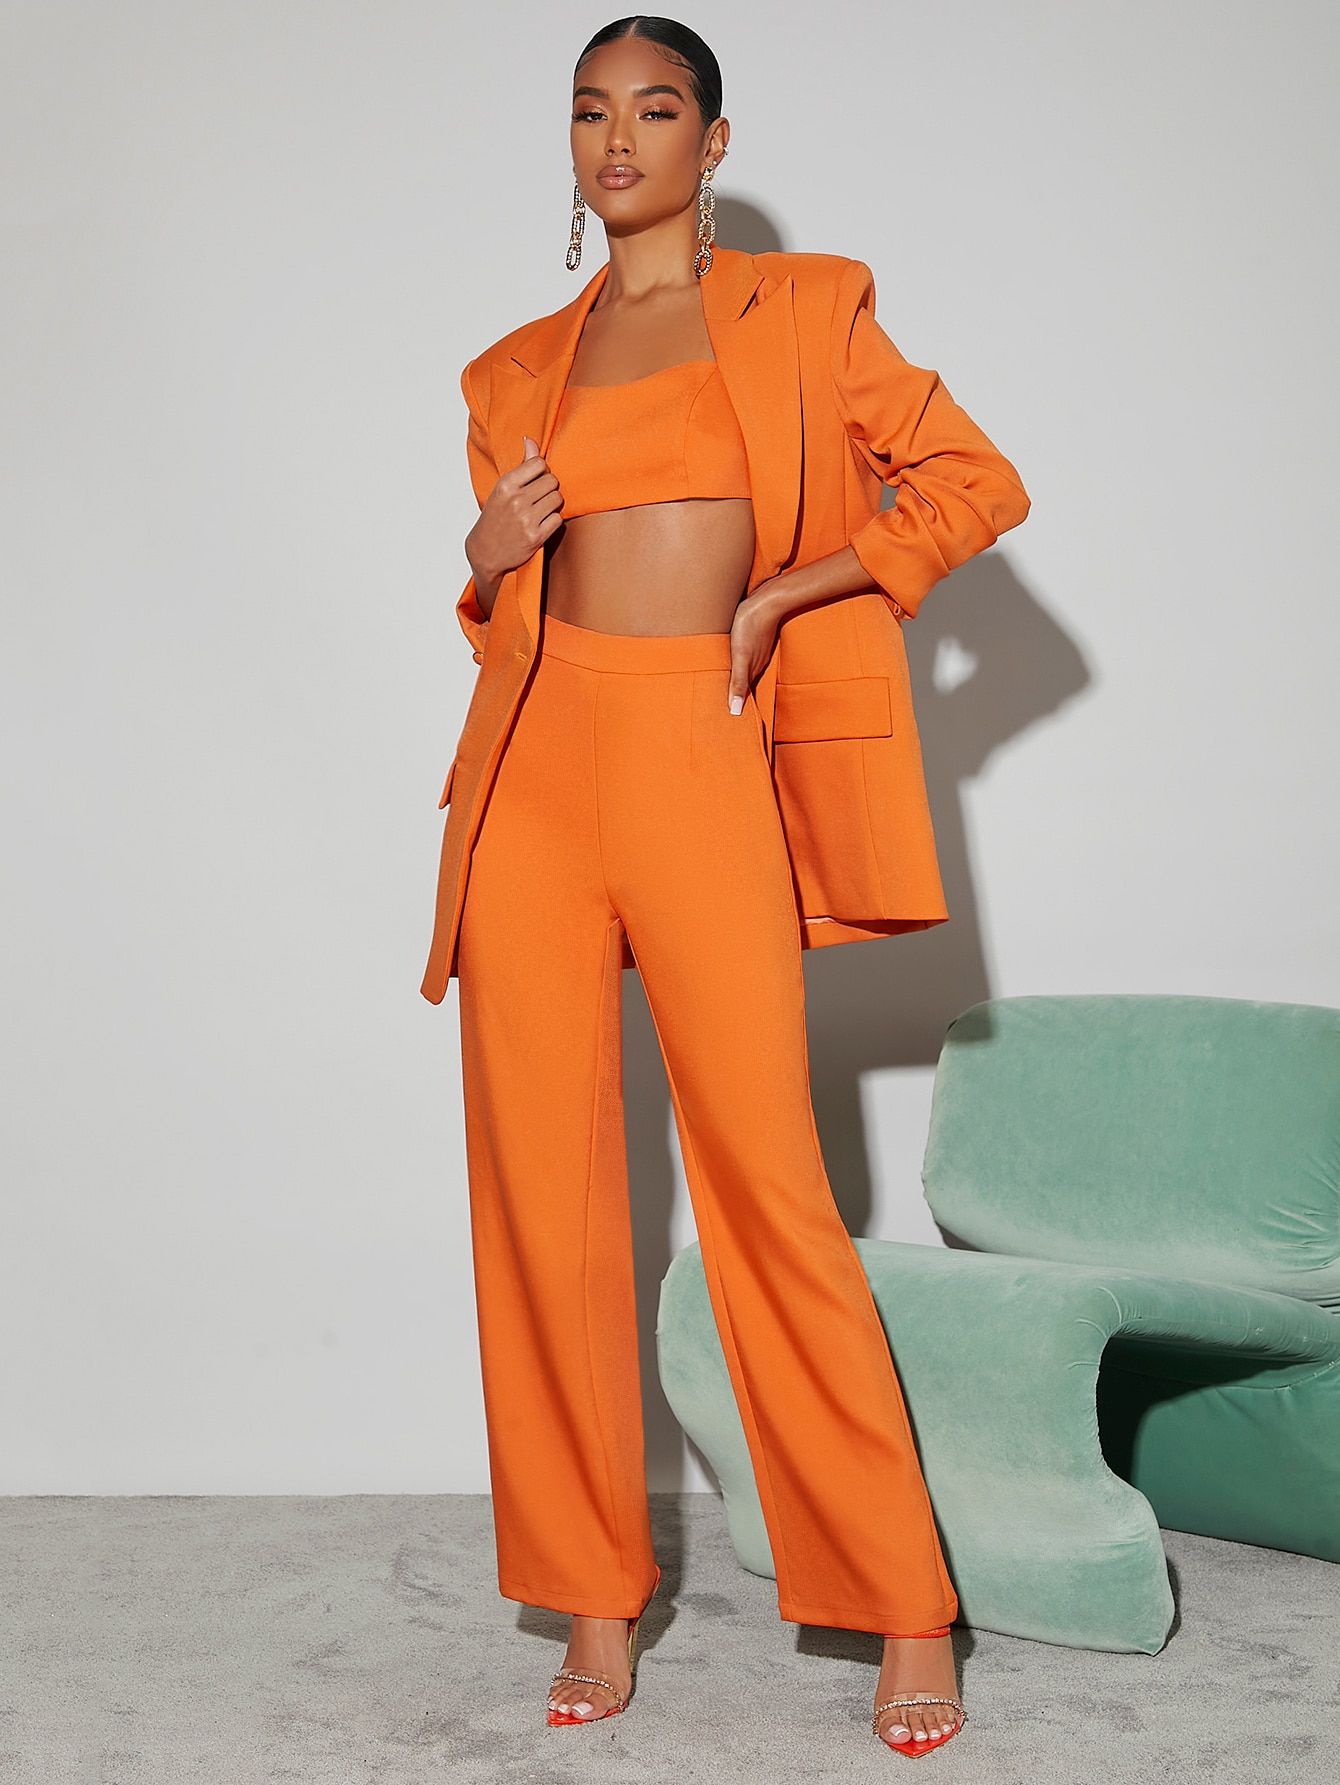 How to Wear Orange Blazer: 15 Attractive Outfit Ideas for Women